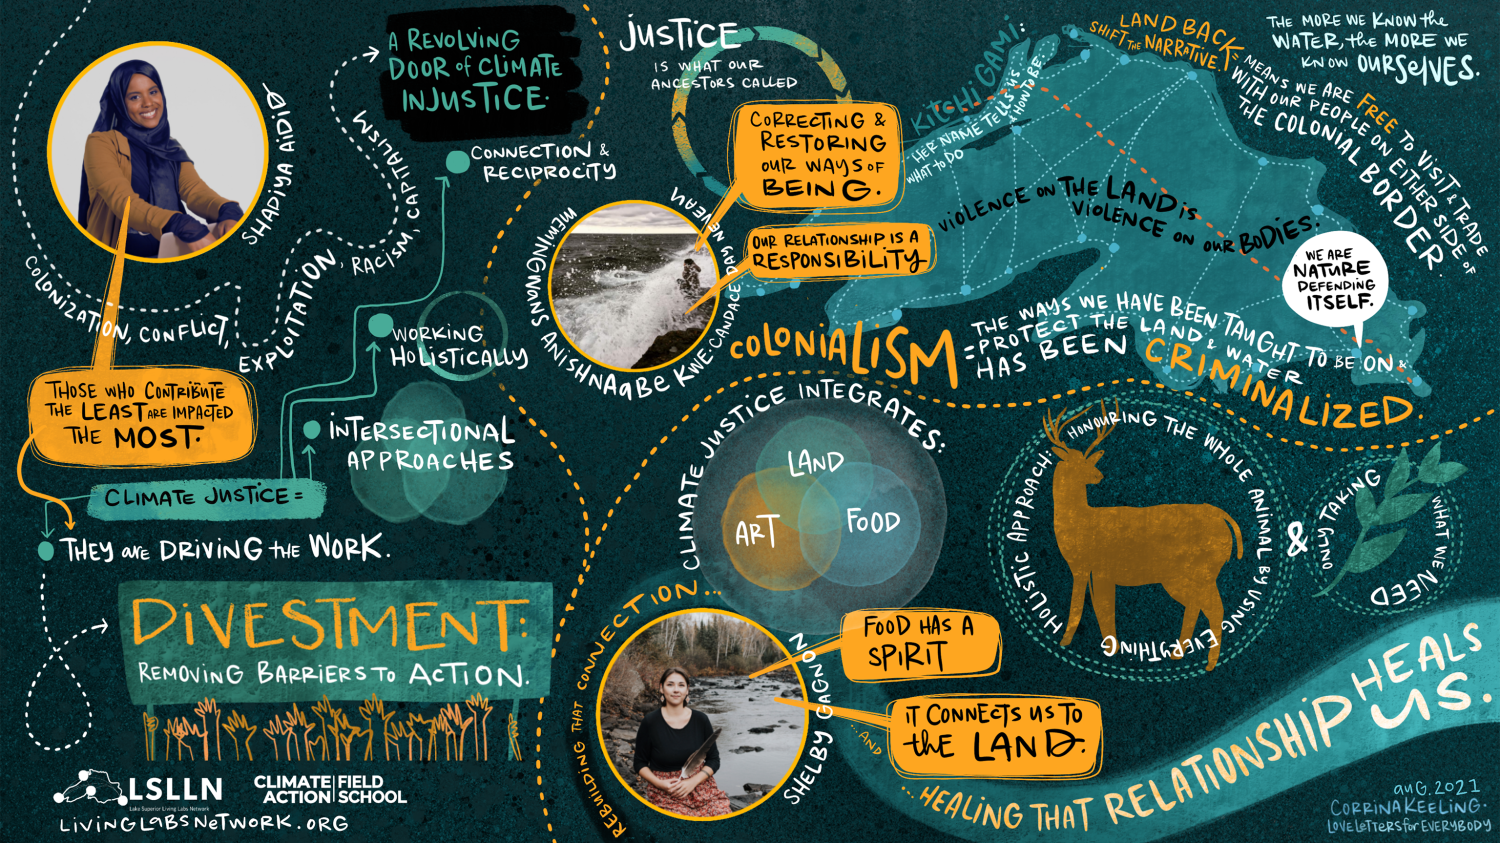 Graphic drawn during panel about climate action with Shadiya Aidid, Shelby Gagnon, and Candace Day Neveau - highlighting divestment, connection to land and food, and justice is what our ancestors called correcting and restoring our ways of being.